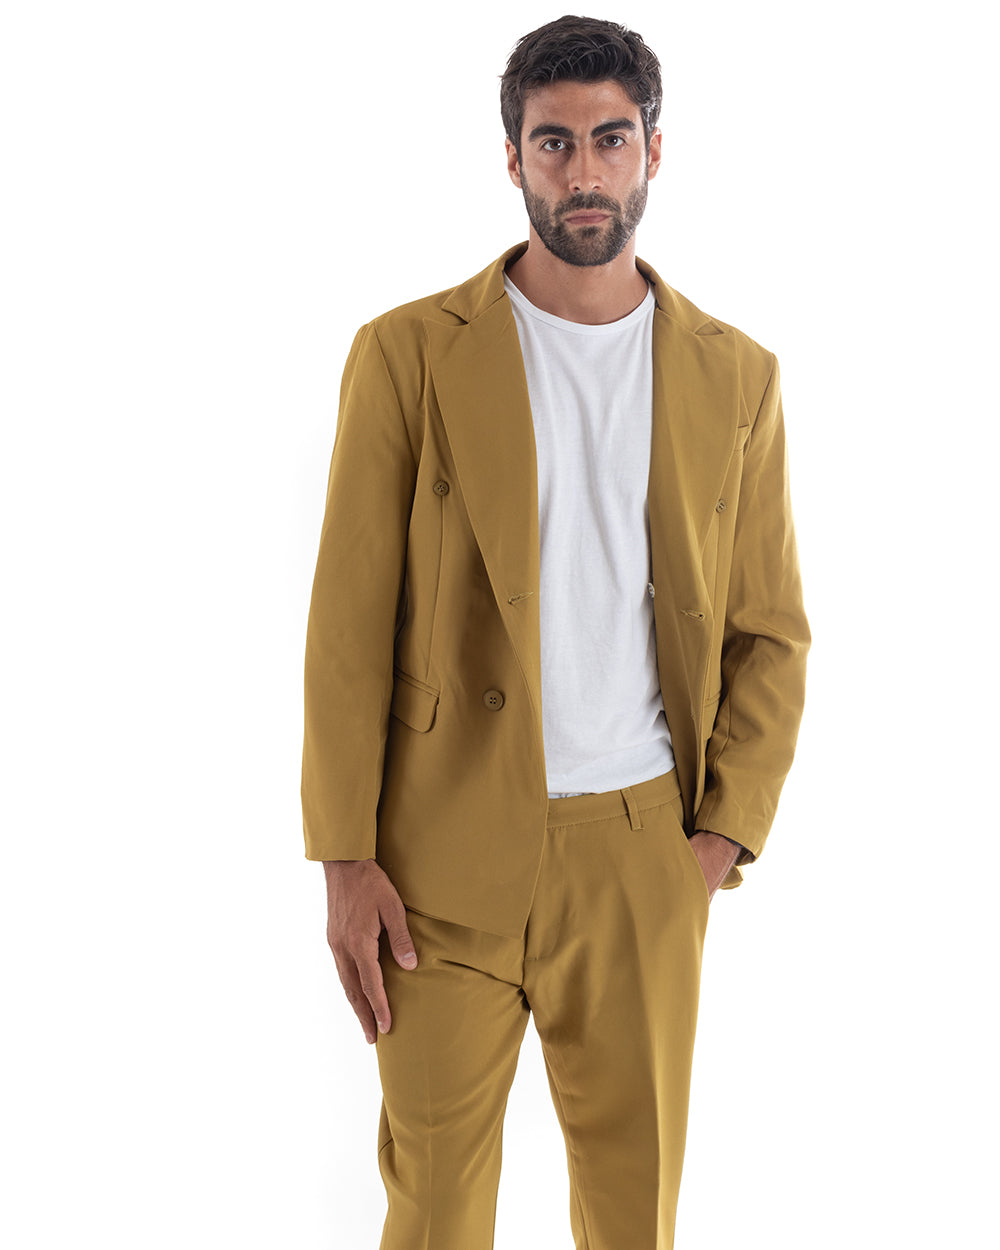 Double-Breasted Men's Suit Viscose Suit Jacket Pants Mustard Elegant Ceremony GIOSAL-OU2168A